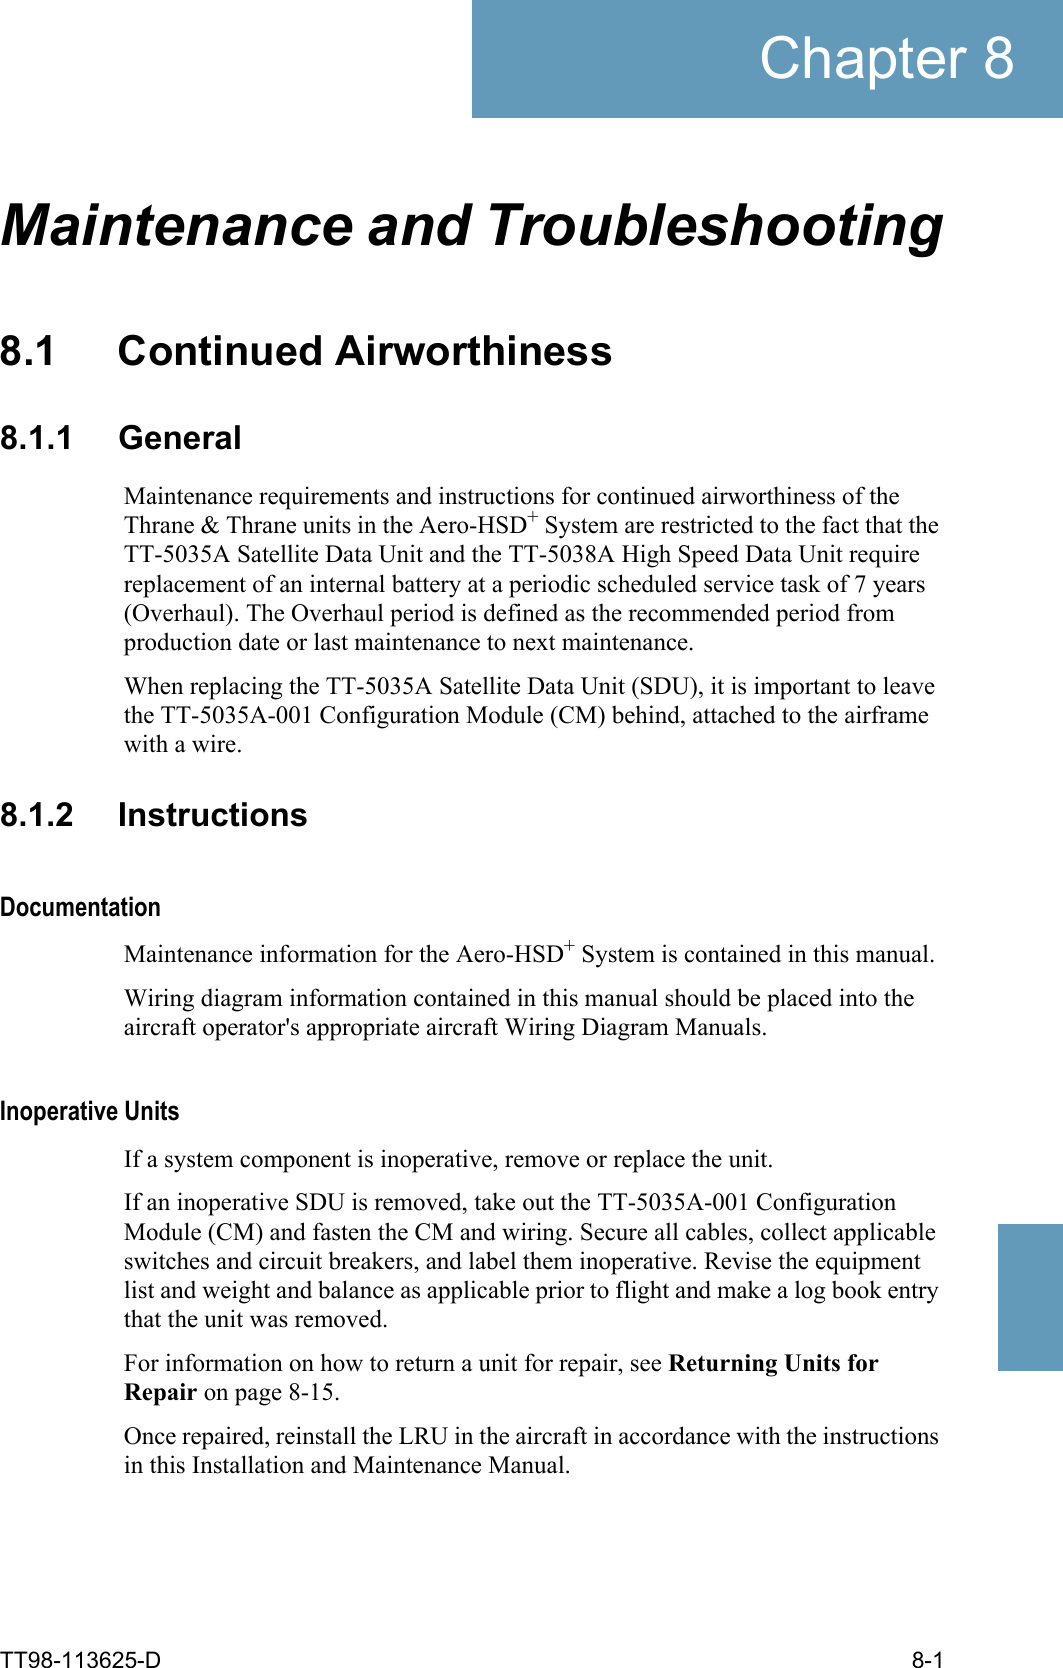 TT98-113625-D 8-1Chapter 88888Maintenance and Troubleshooting88.1 Continued Airworthiness8.1.1 GeneralMaintenance requirements and instructions for continued airworthiness of the Thrane &amp; Thrane units in the Aero-HSD+ System are restricted to the fact that the TT-5035A Satellite Data Unit and the TT-5038A High Speed Data Unit require replacement of an internal battery at a periodic scheduled service task of 7 years (Overhaul). The Overhaul period is defined as the recommended period from production date or last maintenance to next maintenance.When replacing the TT-5035A Satellite Data Unit (SDU), it is important to leave the TT-5035A-001 Configuration Module (CM) behind, attached to the airframe with a wire. 8.1.2 InstructionsDocumentationMaintenance information for the Aero-HSD+ System is contained in this manual.Wiring diagram information contained in this manual should be placed into the aircraft operator&apos;s appropriate aircraft Wiring Diagram Manuals.Inoperative UnitsIf a system component is inoperative, remove or replace the unit.If an inoperative SDU is removed, take out the TT-5035A-001 Configuration Module (CM) and fasten the CM and wiring. Secure all cables, collect applicable switches and circuit breakers, and label them inoperative. Revise the equipment list and weight and balance as applicable prior to flight and make a log book entry that the unit was removed.For information on how to return a unit for repair, see Returning Units for Repair on page 8-15.Once repaired, reinstall the LRU in the aircraft in accordance with the instructions in this Installation and Maintenance Manual. 